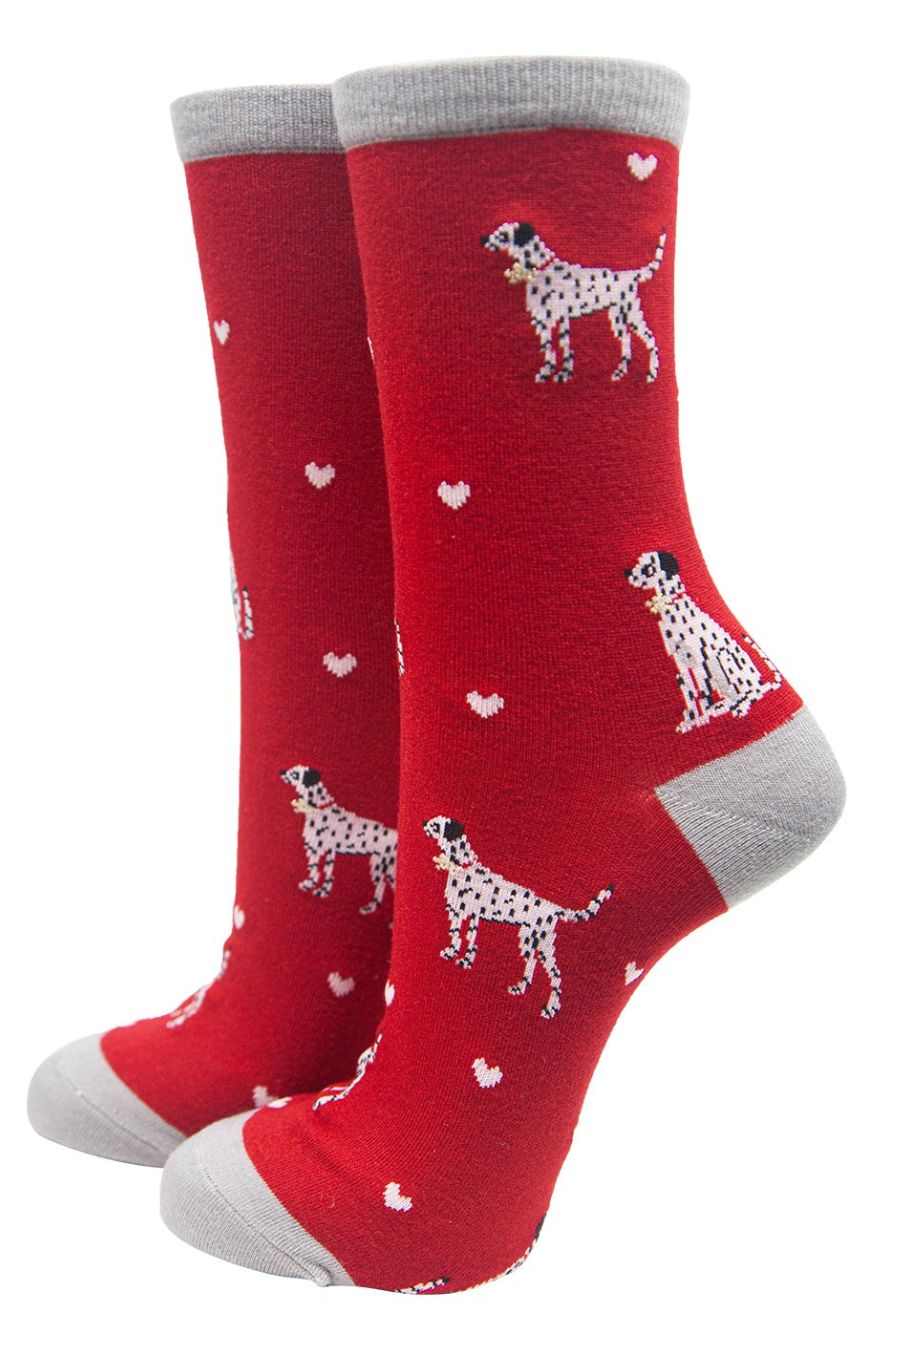 red ankle socks with dalmatian dogs and white love hearts